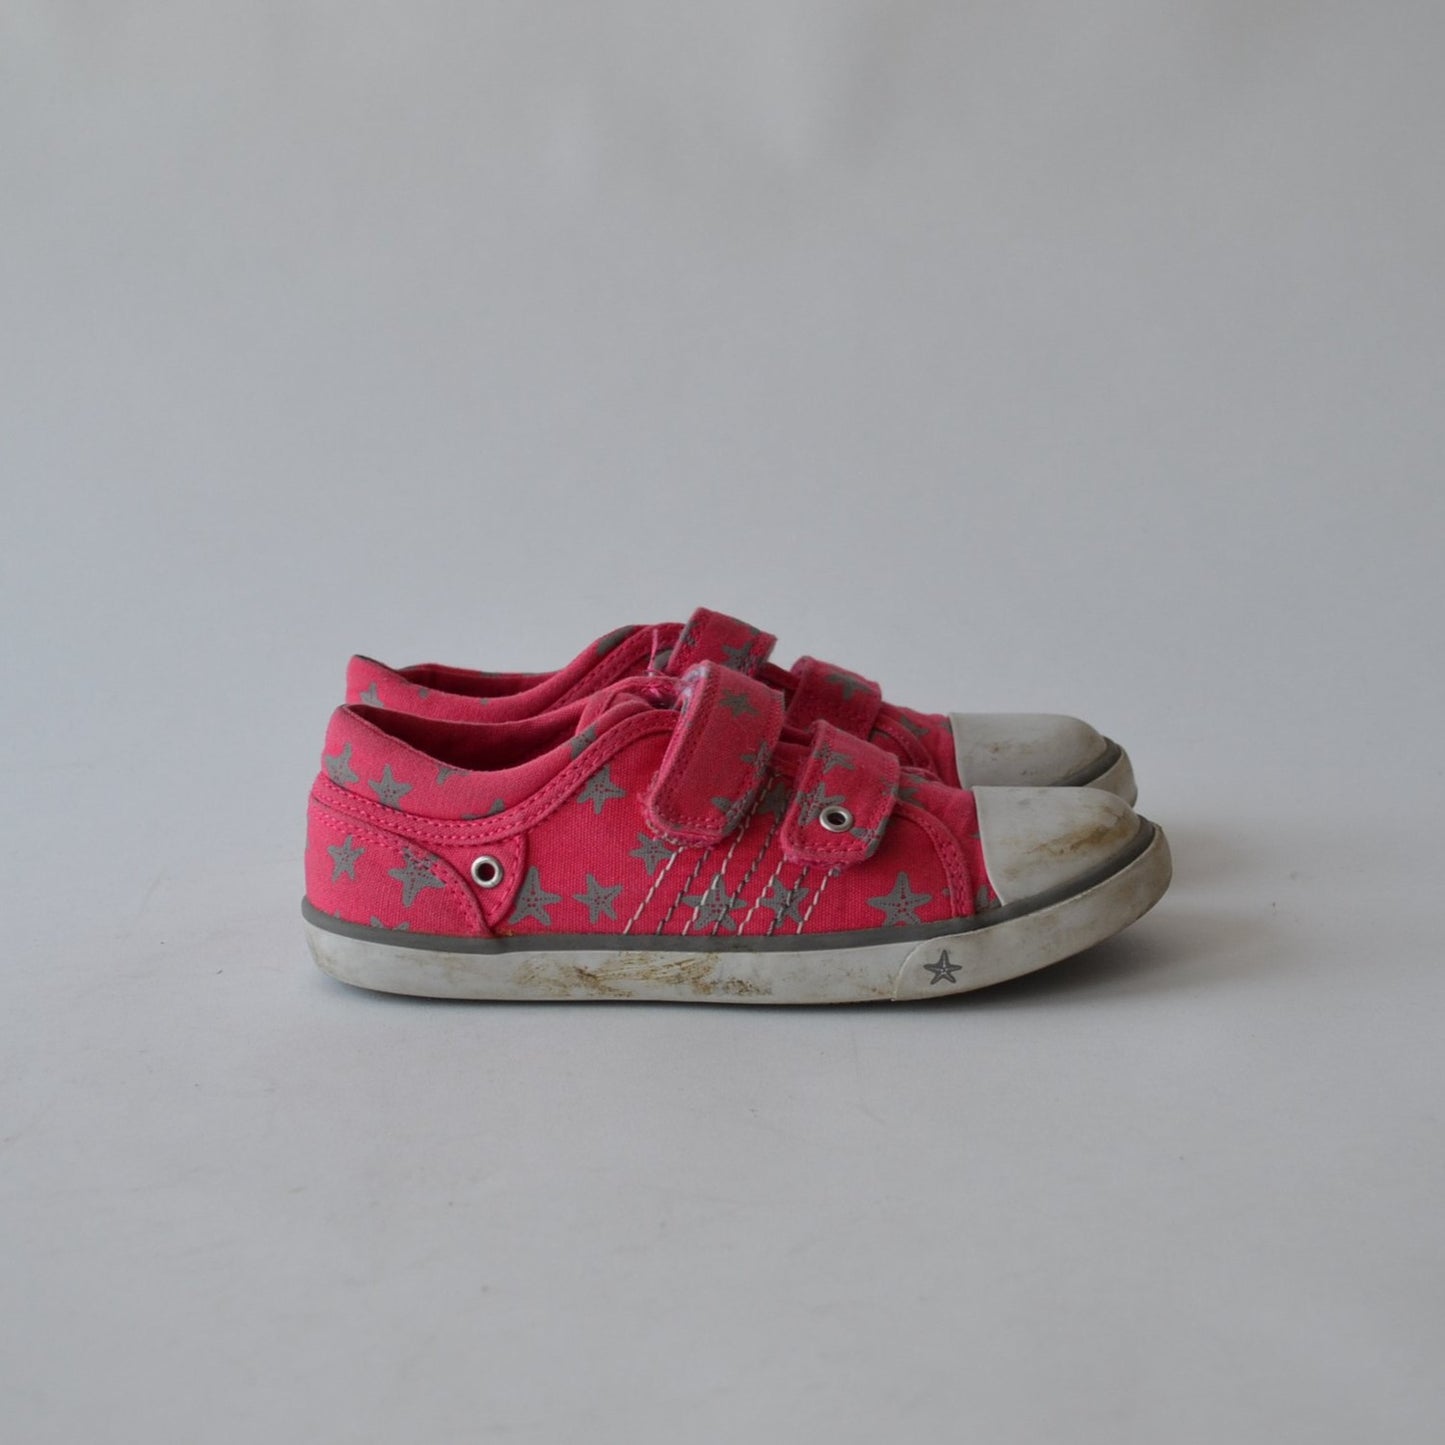 Pink Trainers with Stars Shoe Size 12 (jr)